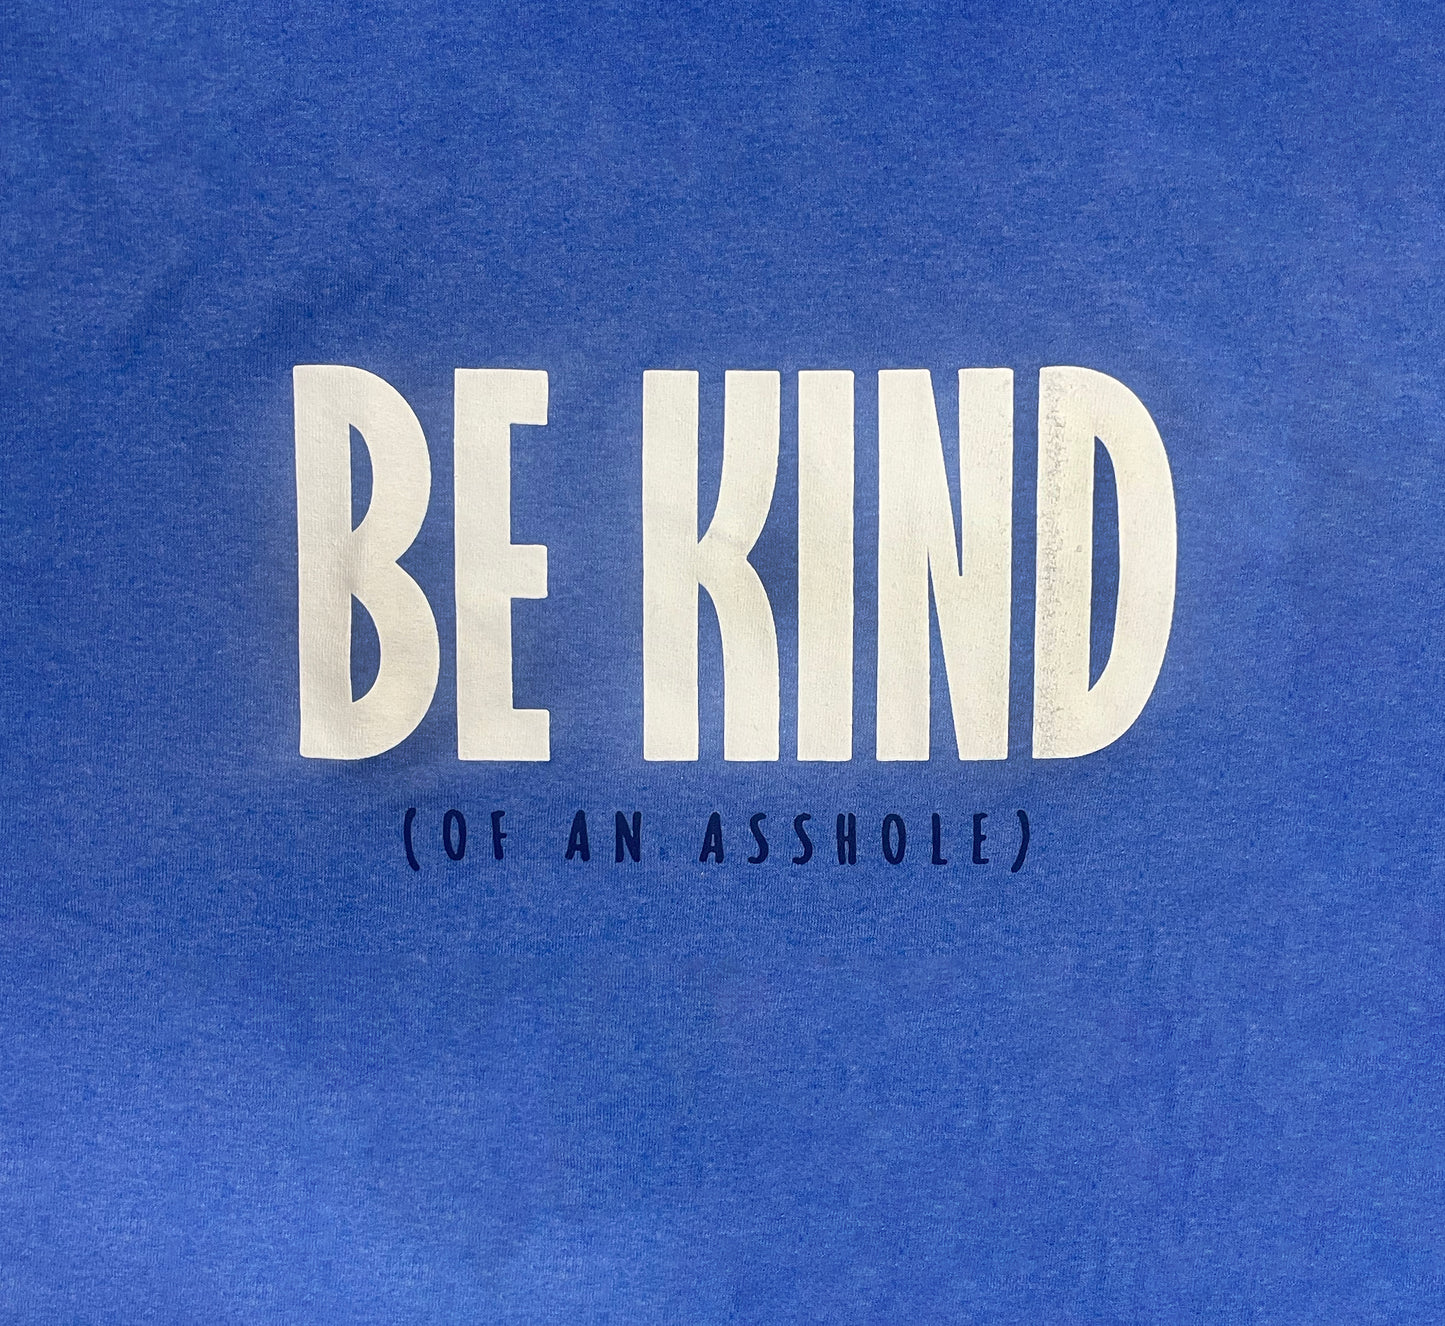 Be Kind of an Asshole